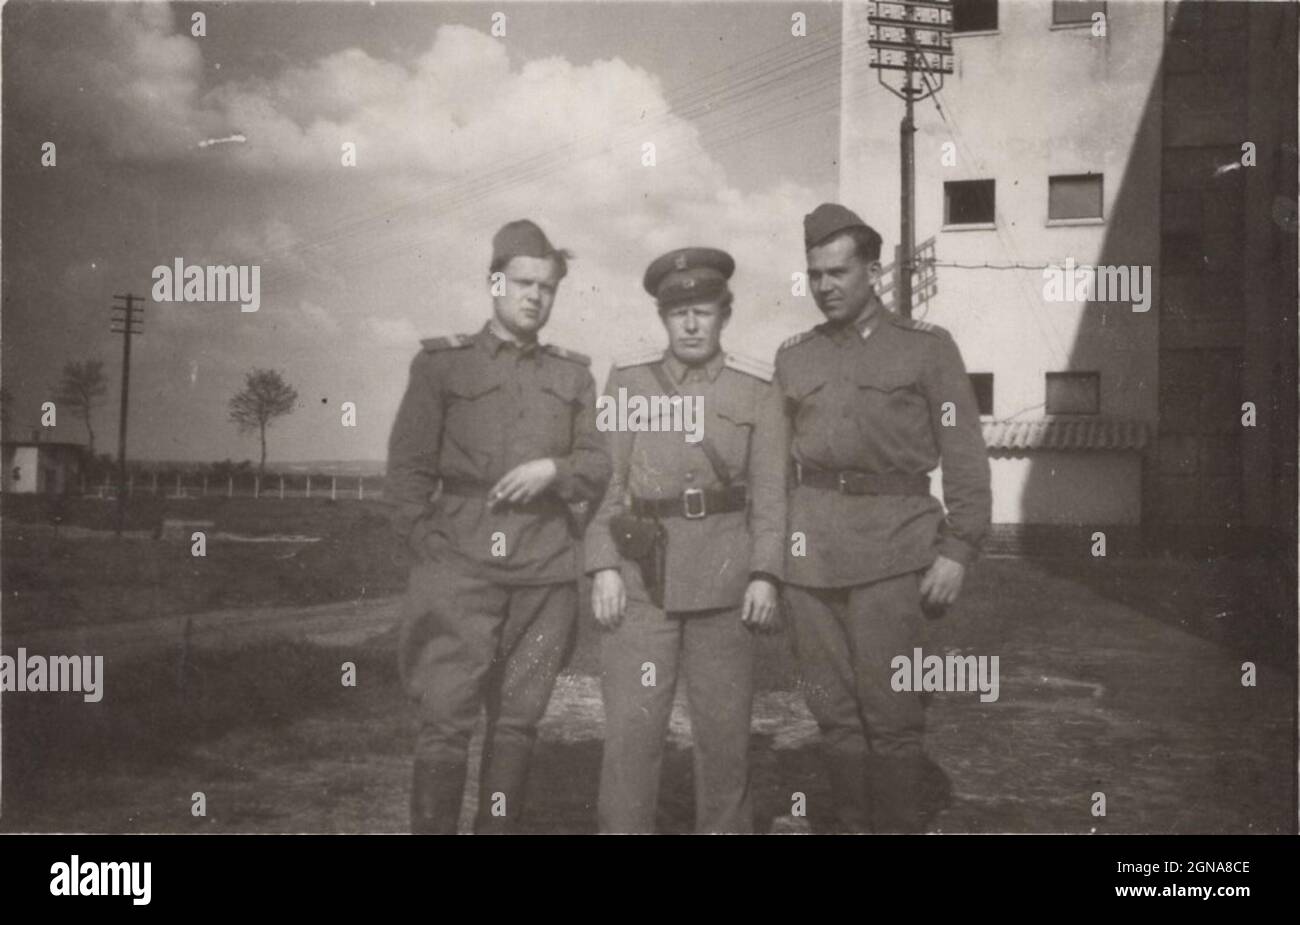 a Proud father ( who is Policeman / police officer) stands with his two cadet sons whose were spending them mandatory time at the Hungarian army in the 1950's. Military service period was 3 years at this time. / vintage man smoking a cigarette Stock Photo